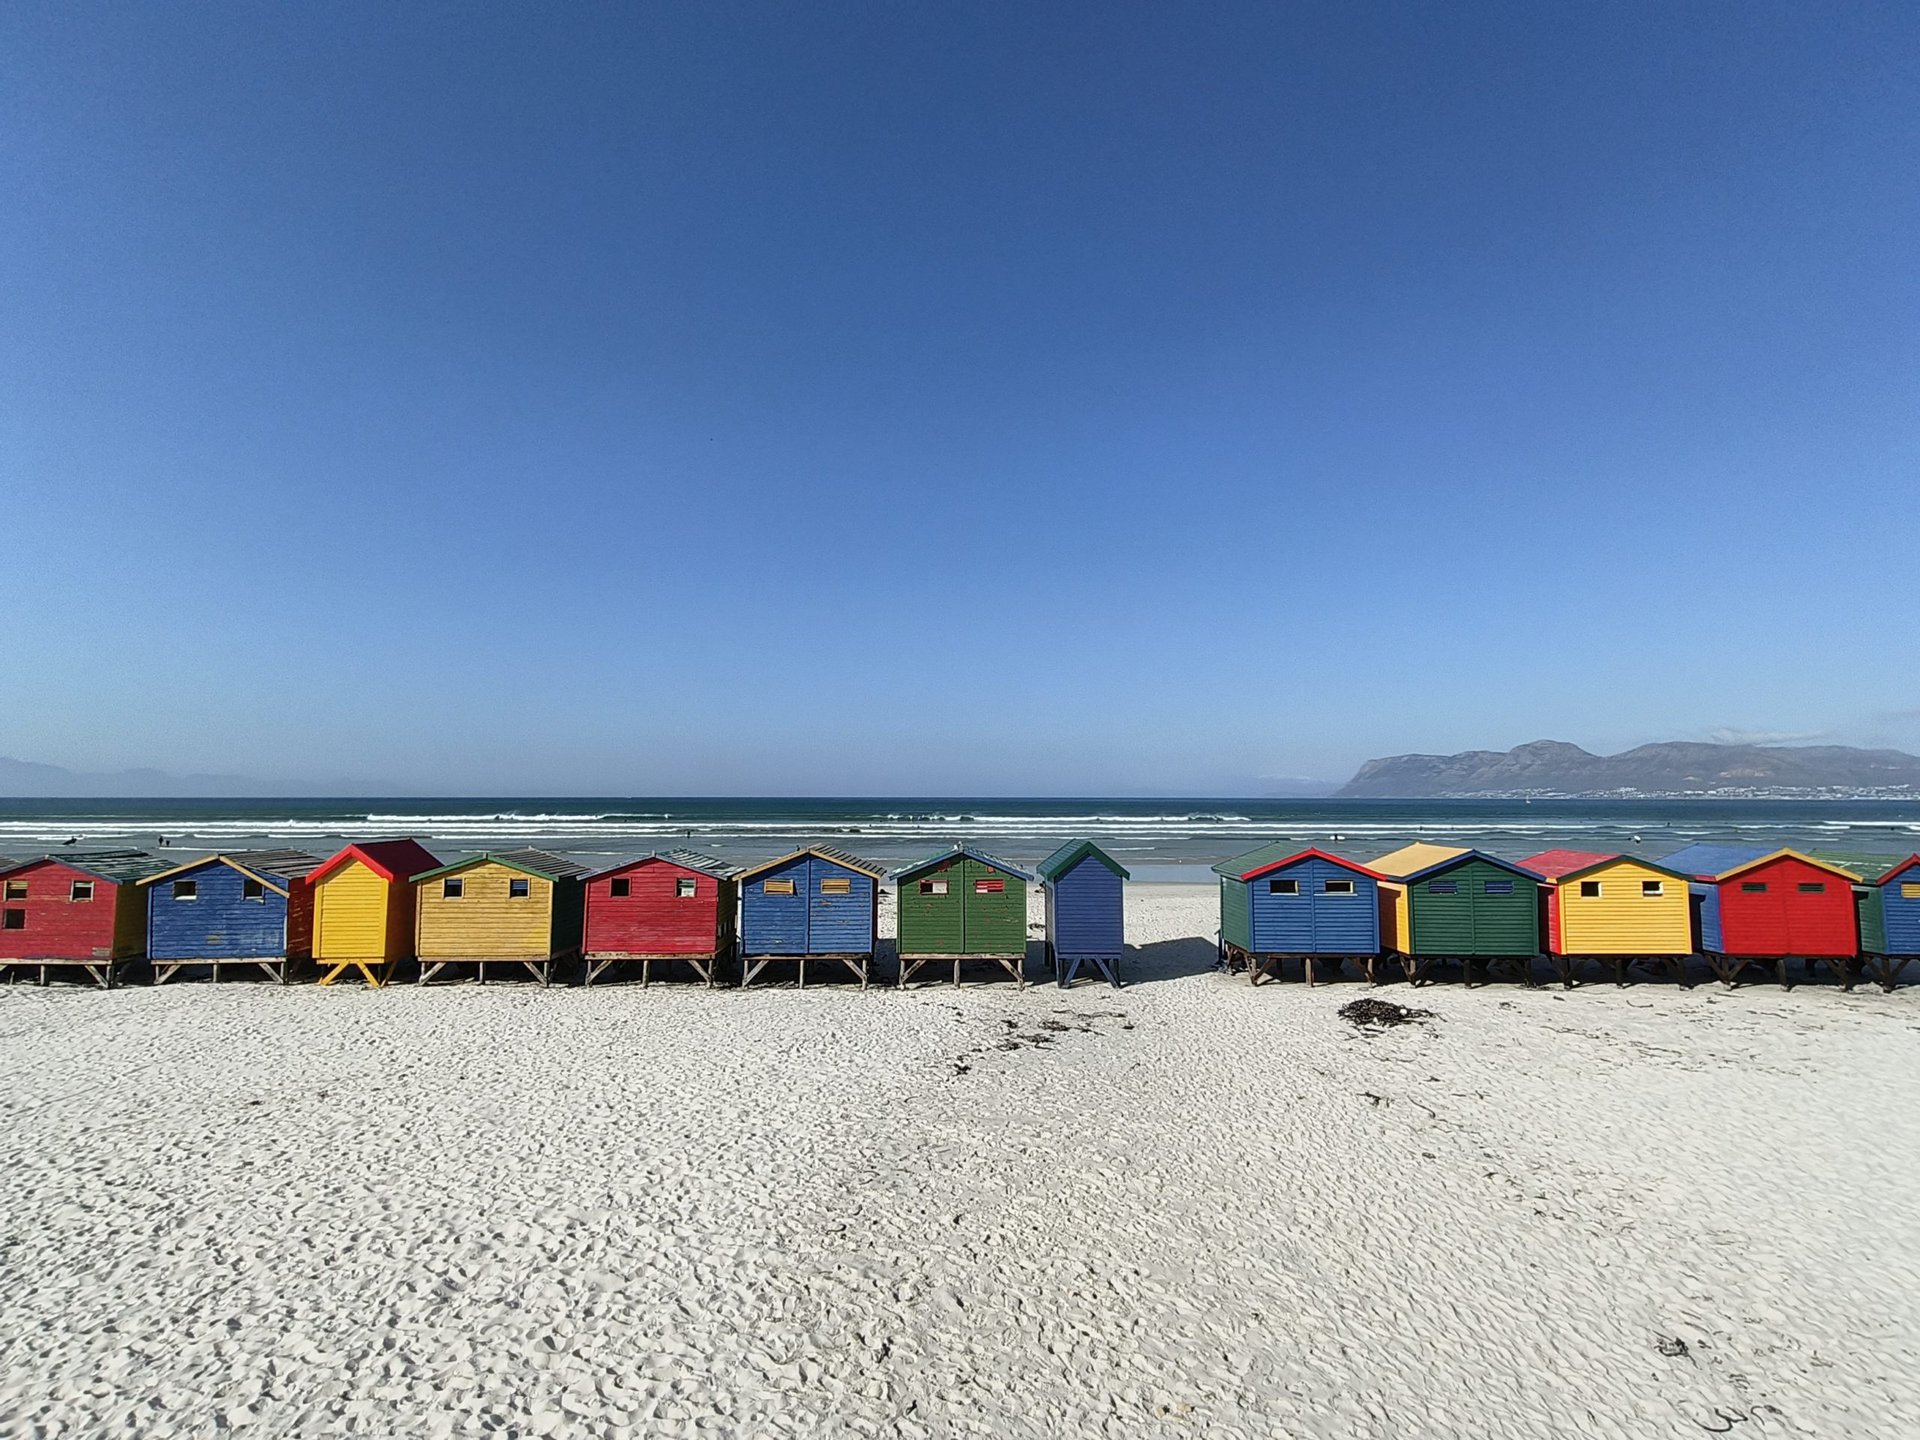 OPPO Reno 8 Pro ultrawide shot of colorful beach huts on a sandy beach.